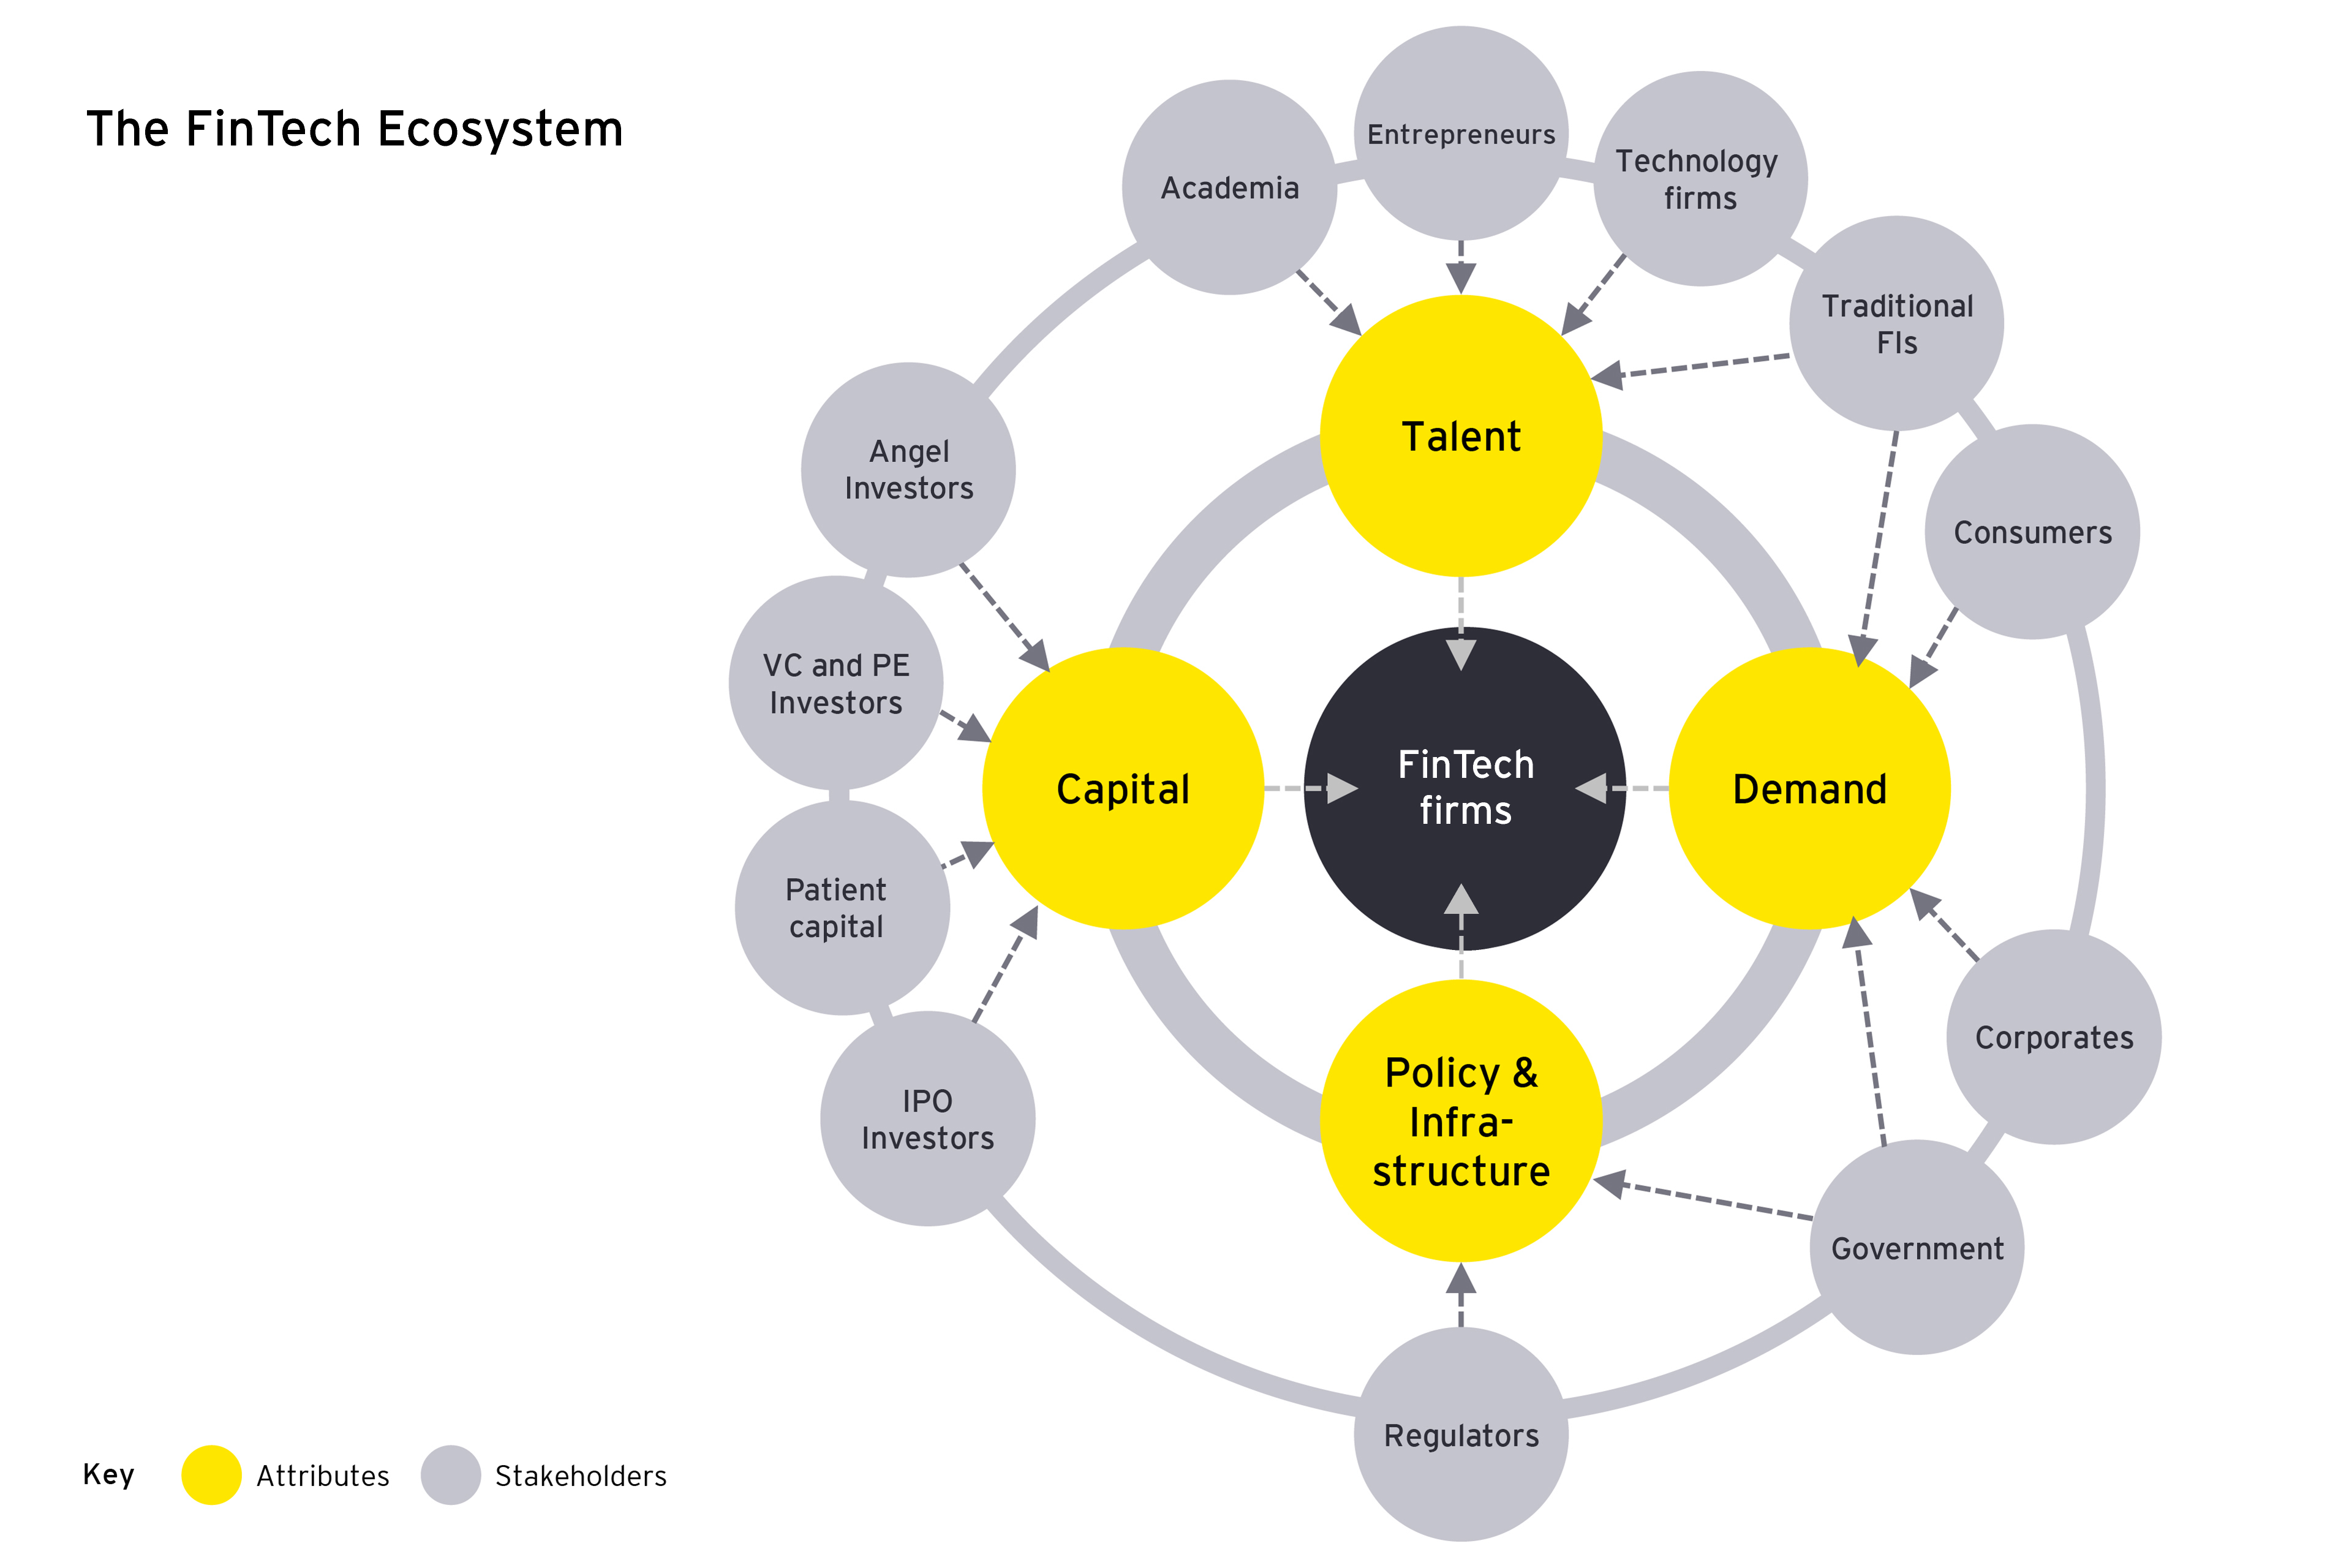 The diagram of the pillars of the FinTech ecosystem